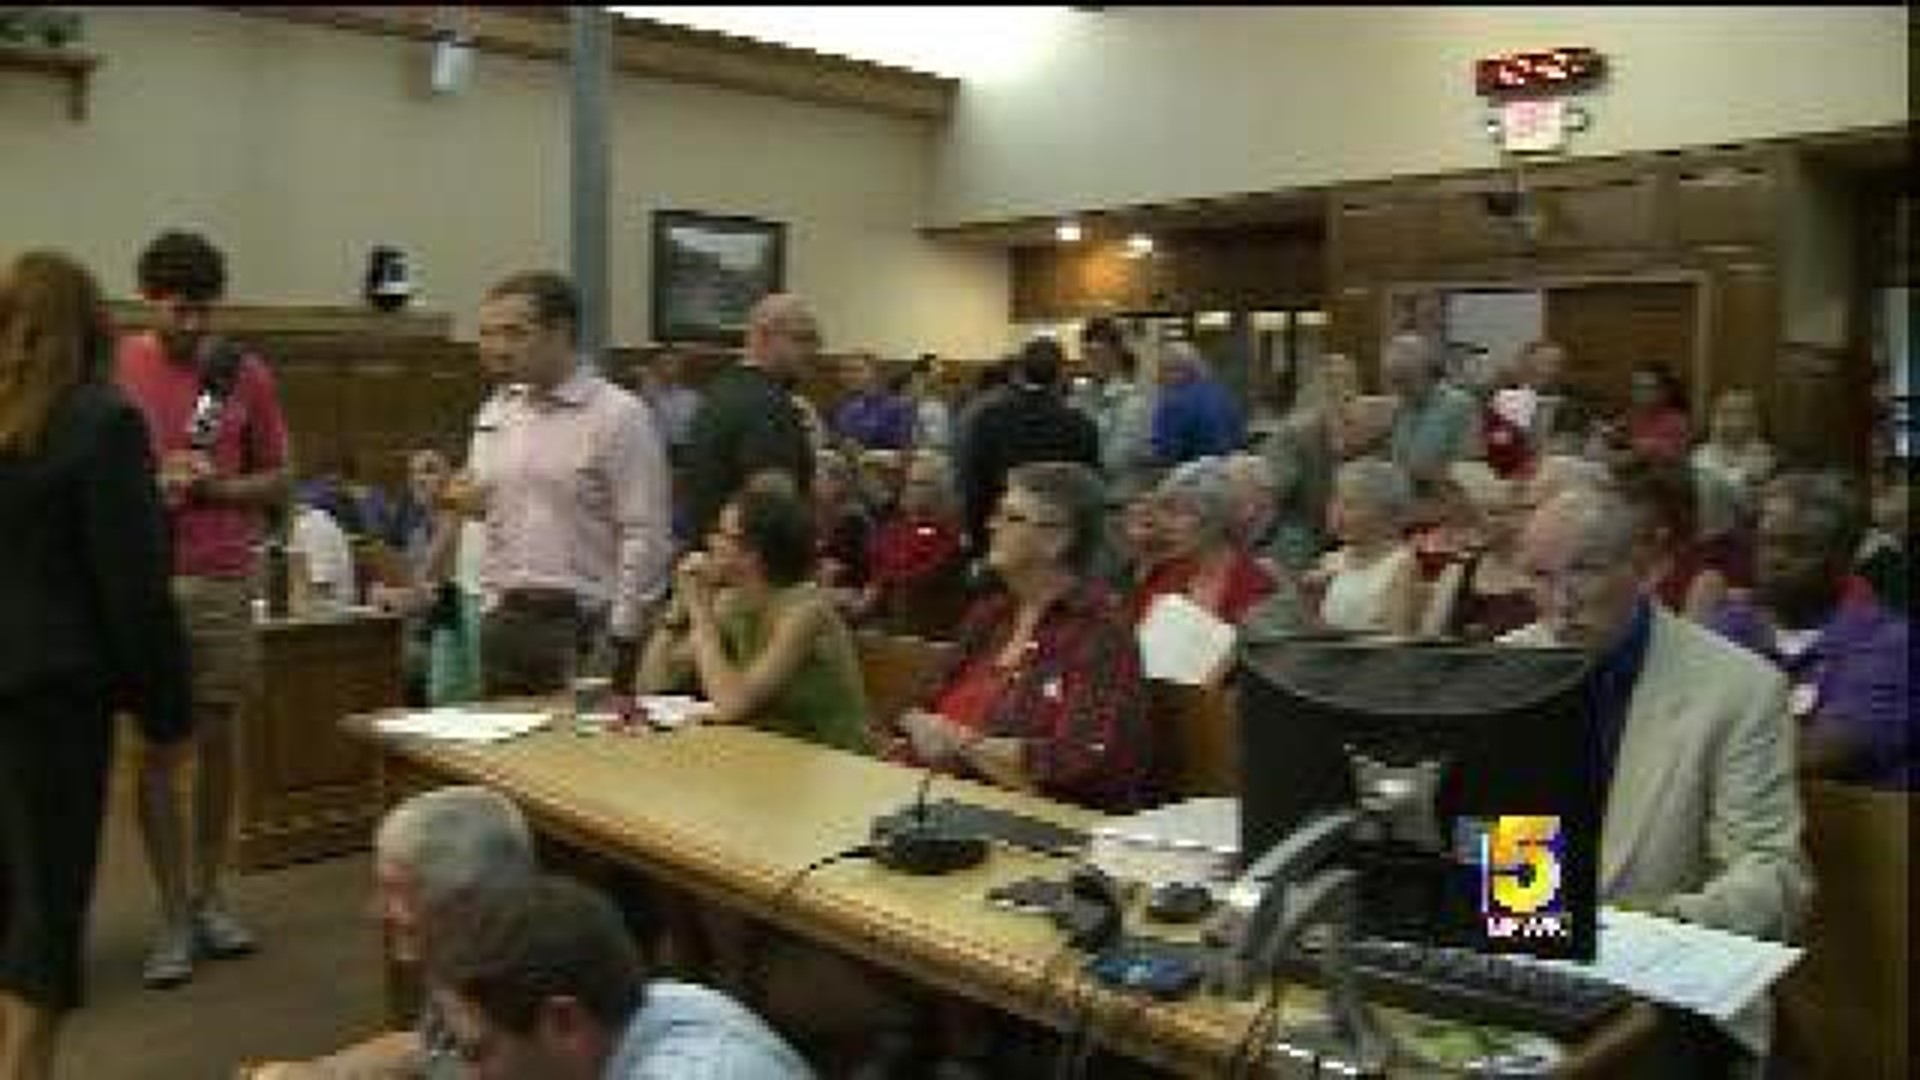 Council Discusses Civil Rights Issue